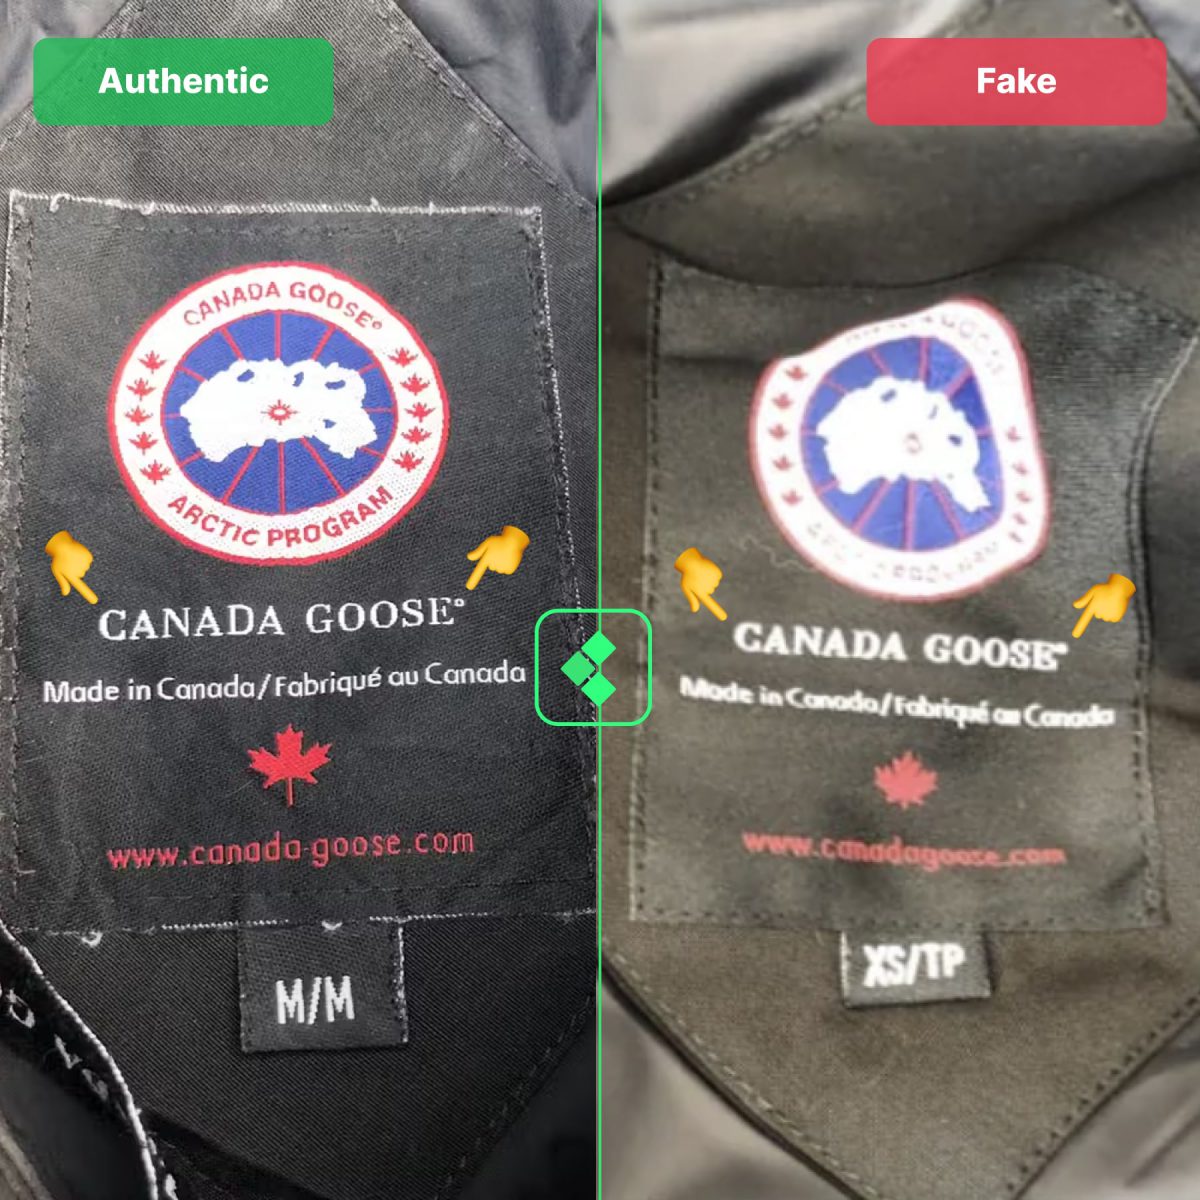 Neck Tag comparison of the real vs fake Canada Goose Jackets